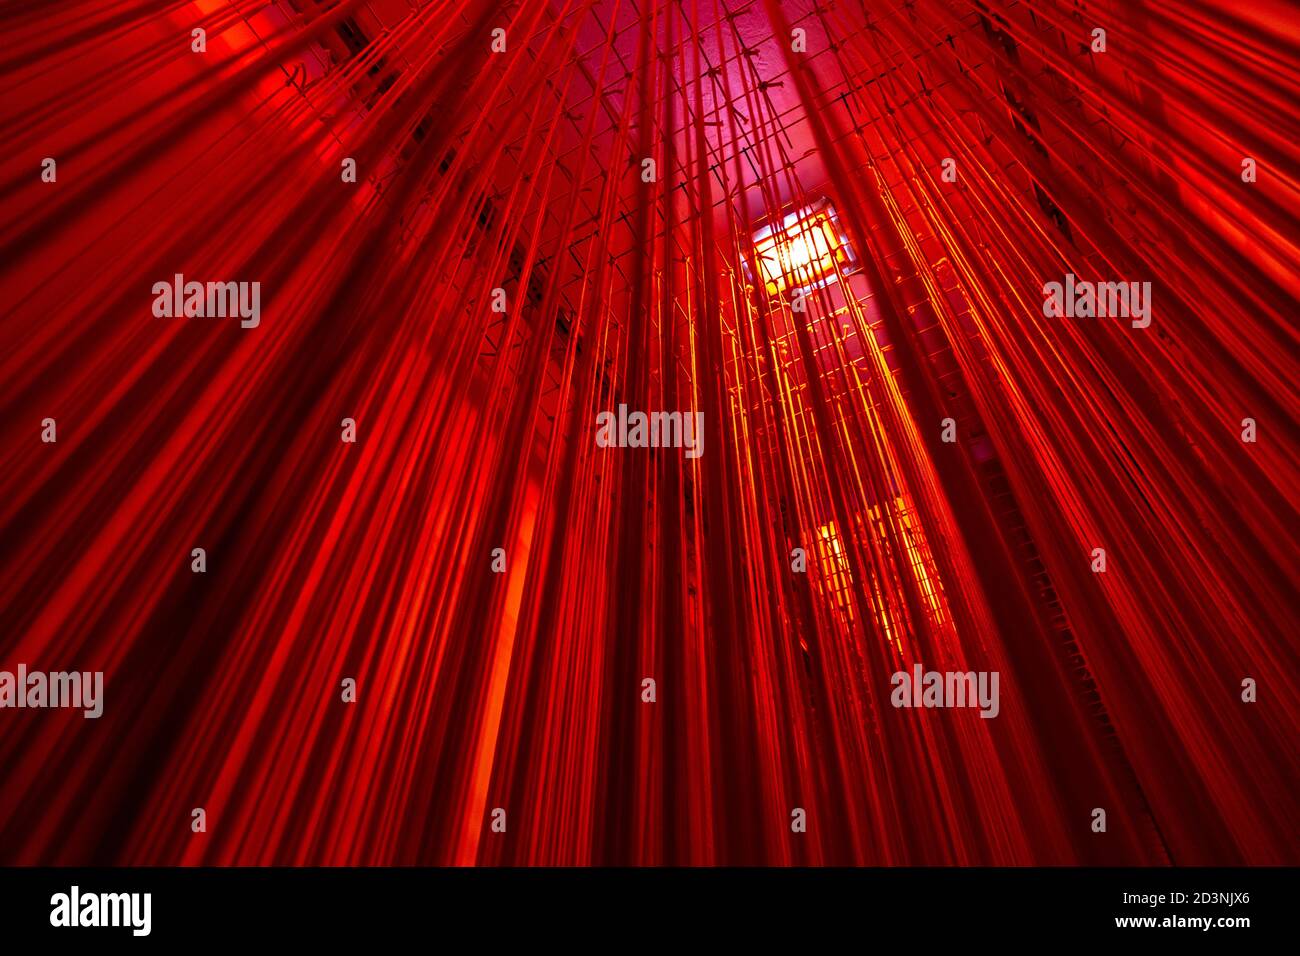 Red wire experiance at Cosmos Muzeum - immersive Museum of Illusions, Warschau, Polen Stockfoto